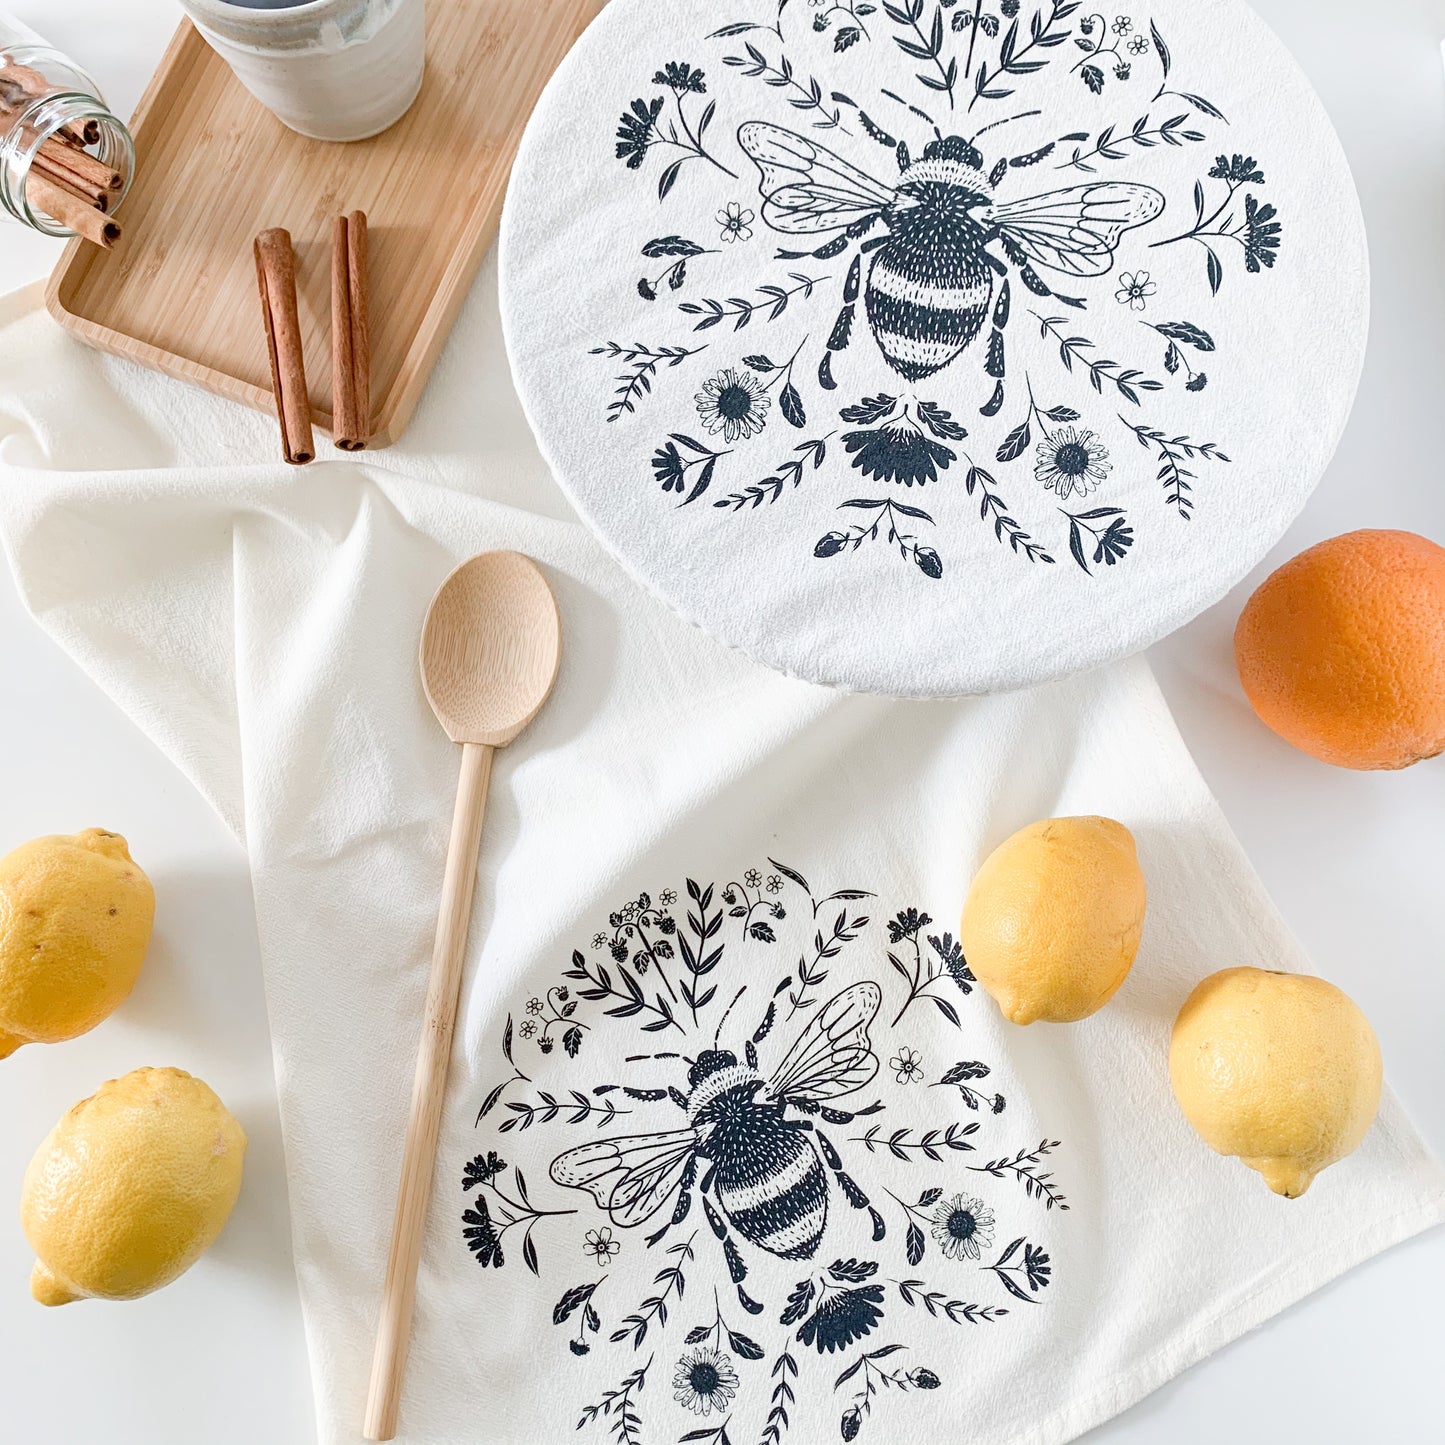 A bee tea towel and matching bee cowl cover made from cotton. They're surrounded by lemons, oranges, cinnamon sticks, and bamboo utensils.